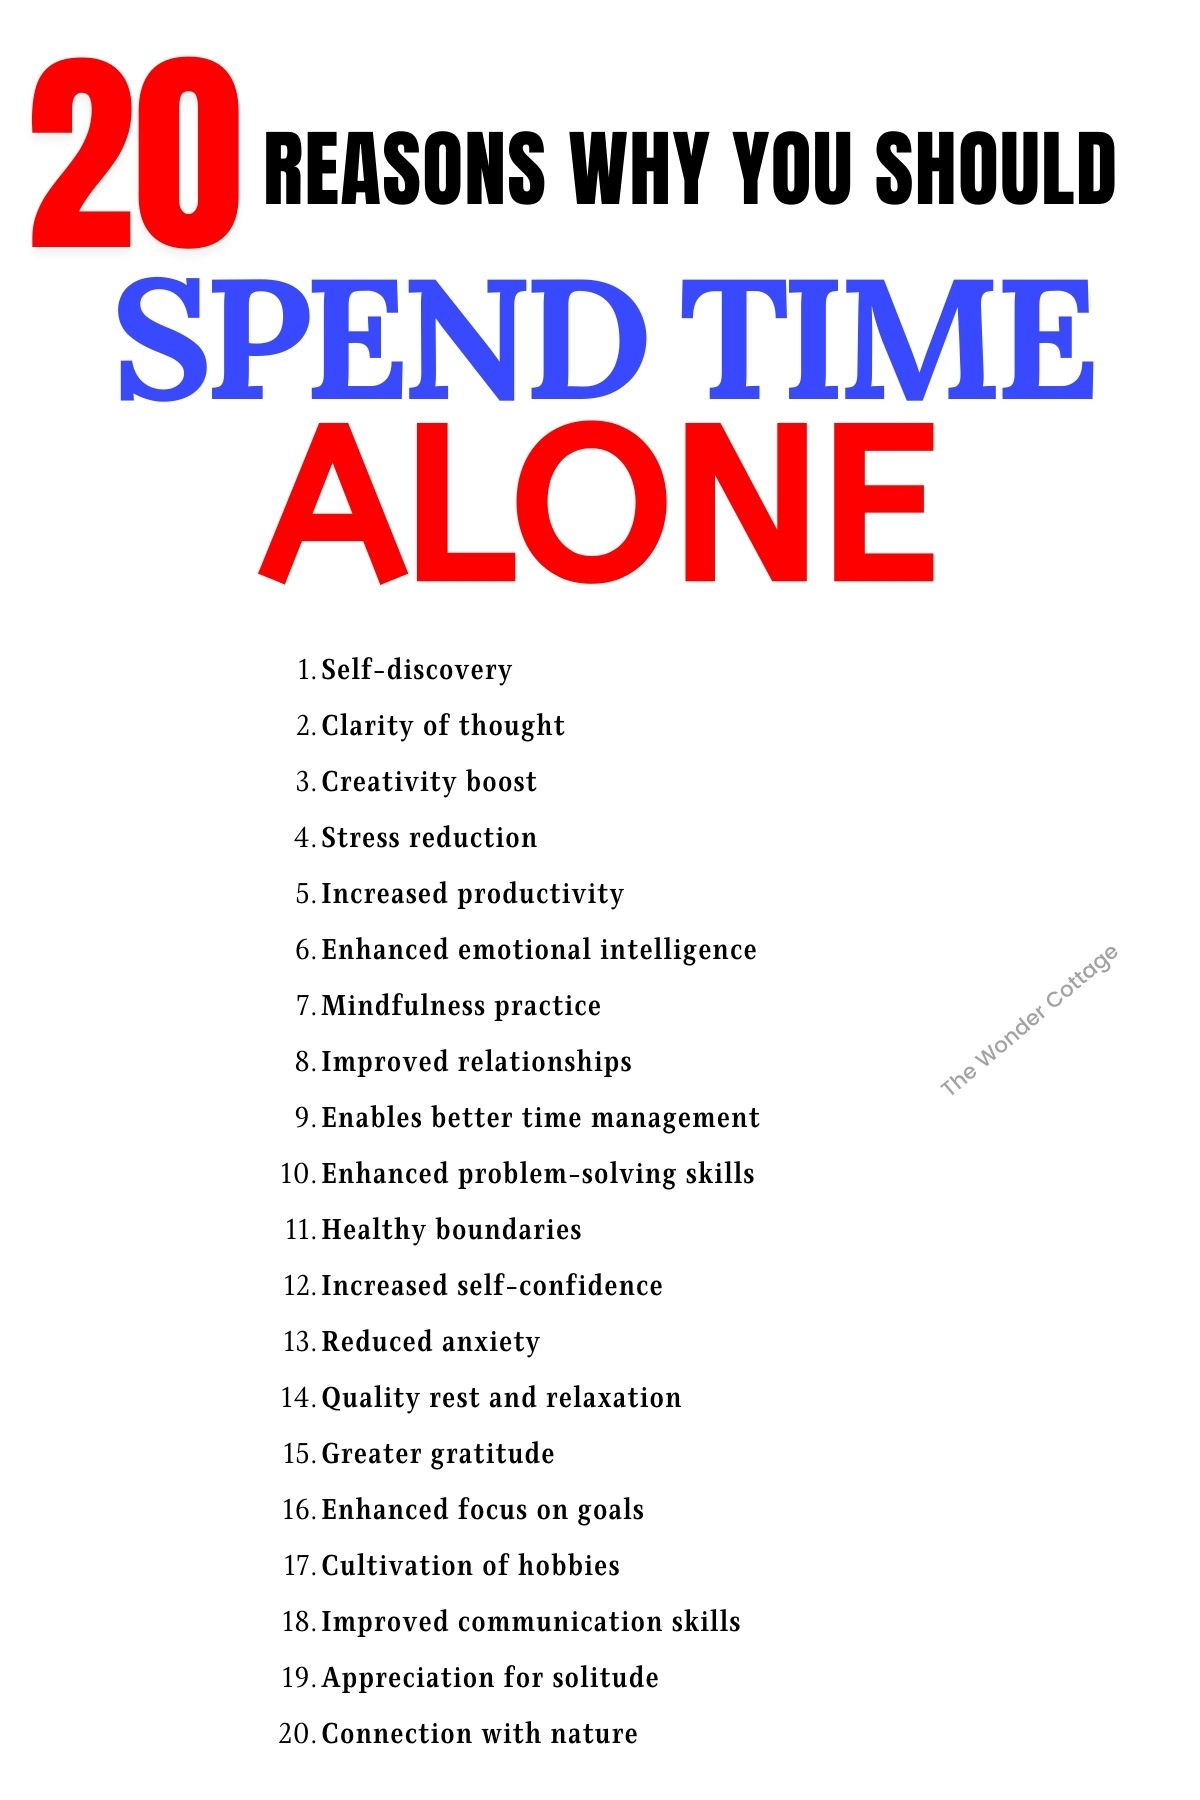 Reasons Why You Should Spend Time Alone